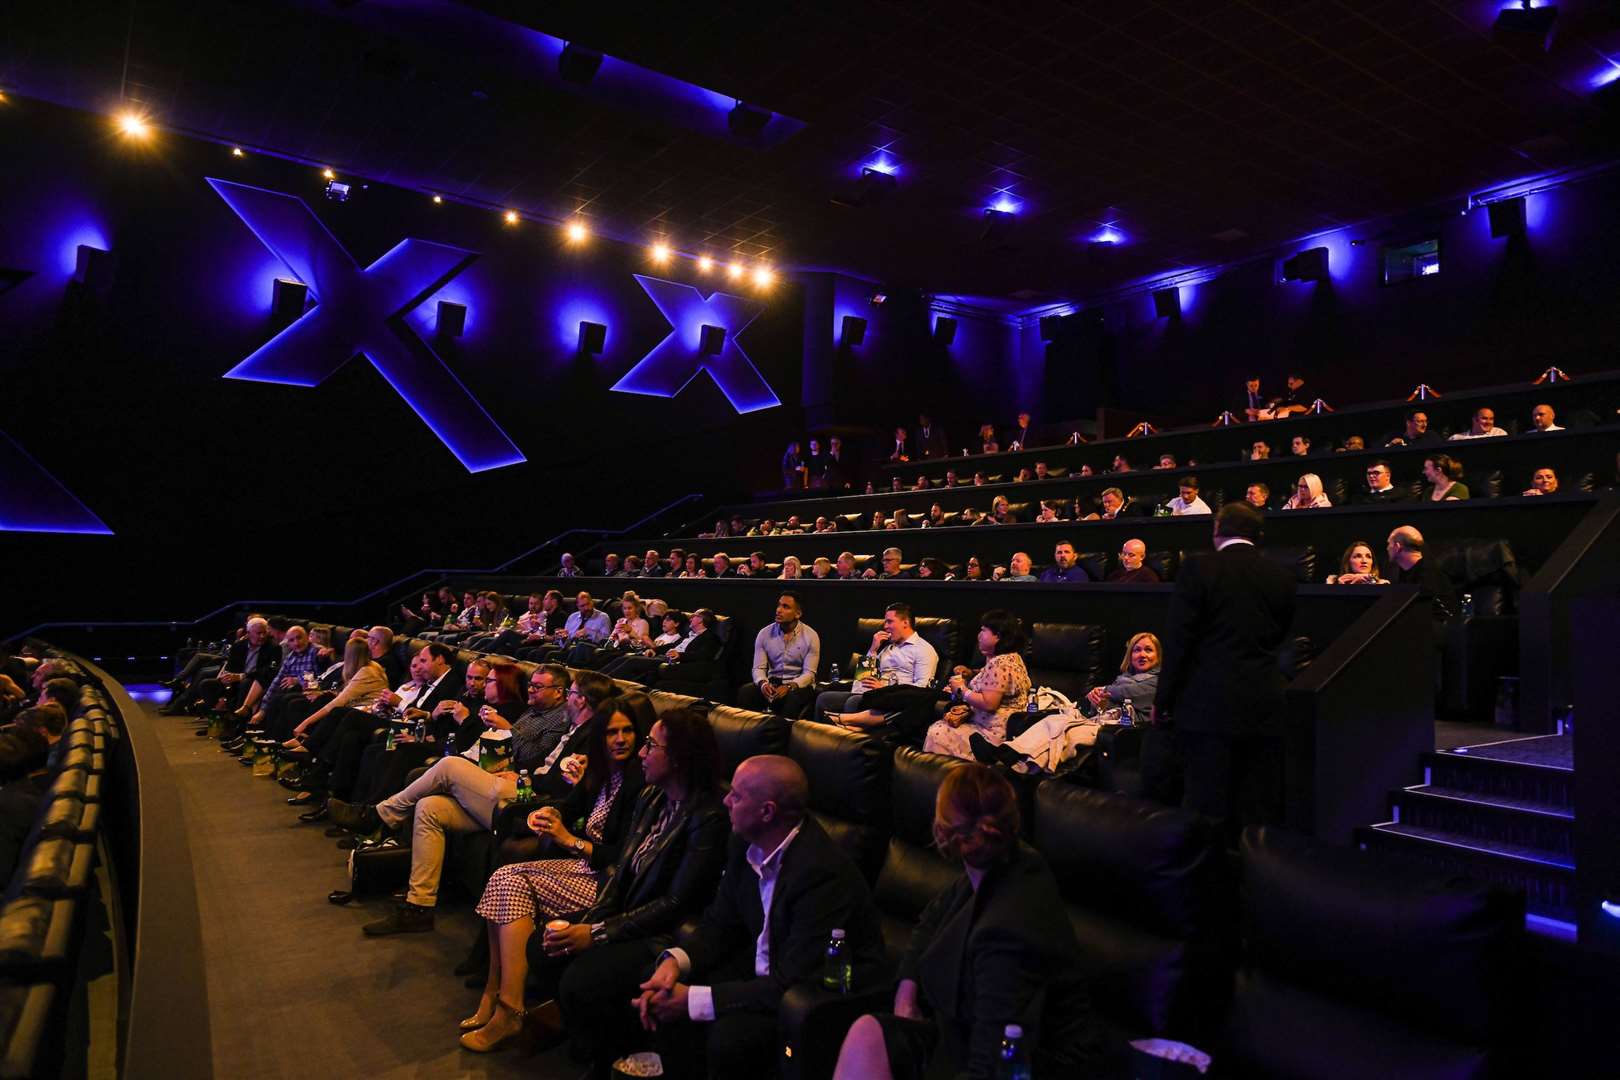 The cinema at Bluewater has recently been refurbished and features 17 state-of-the-art screens. Picture: Showcase Cinema